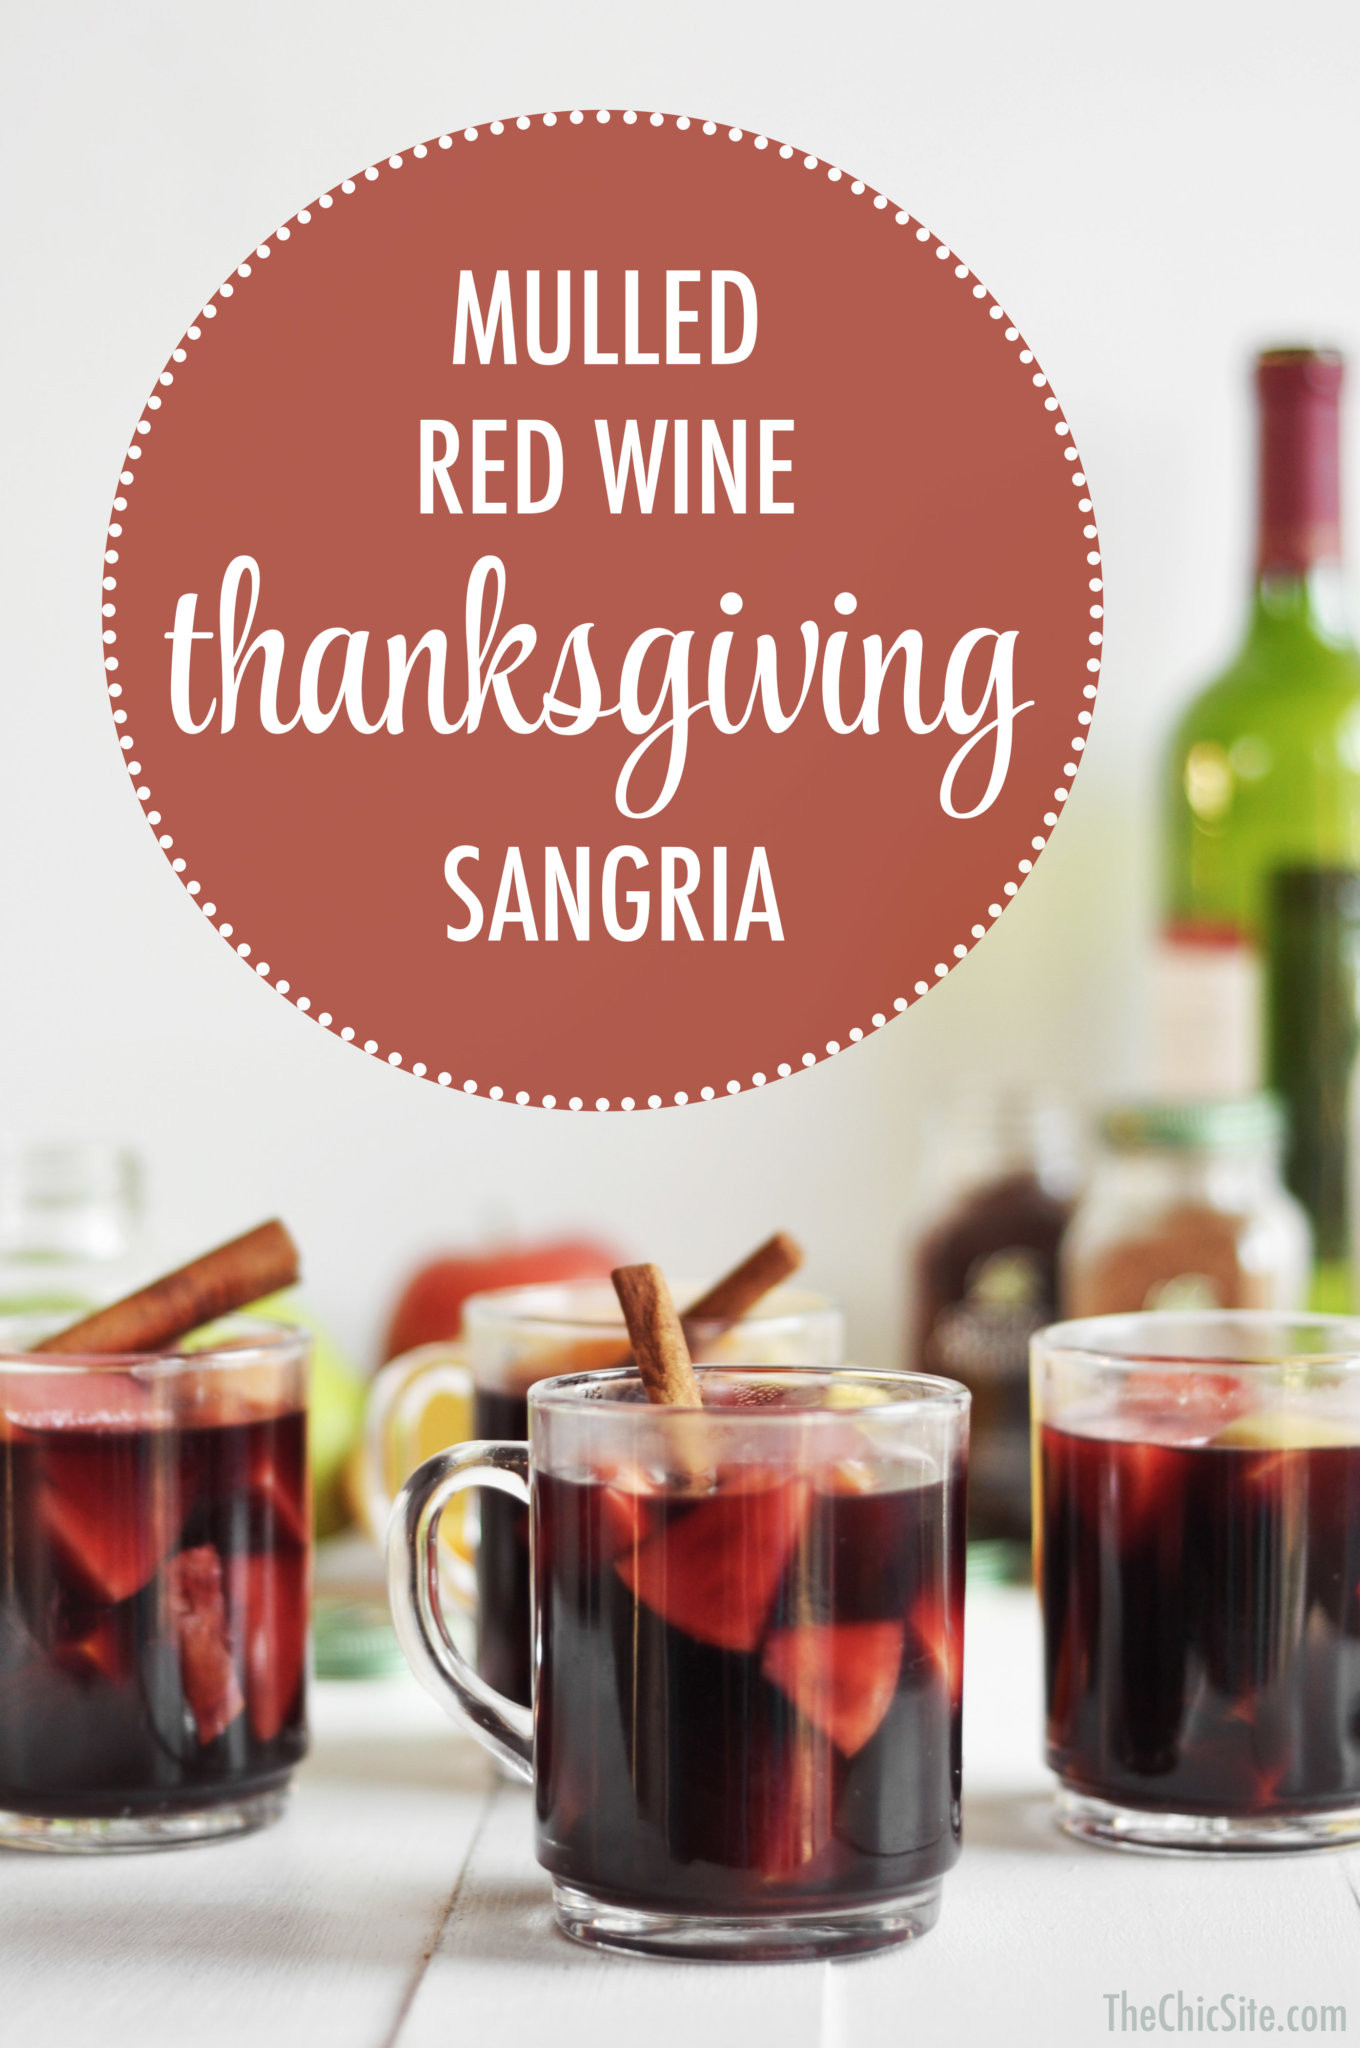 Thanksgiving Drinks Alcoholic
 Thanksgiving Sangria The Chic Site